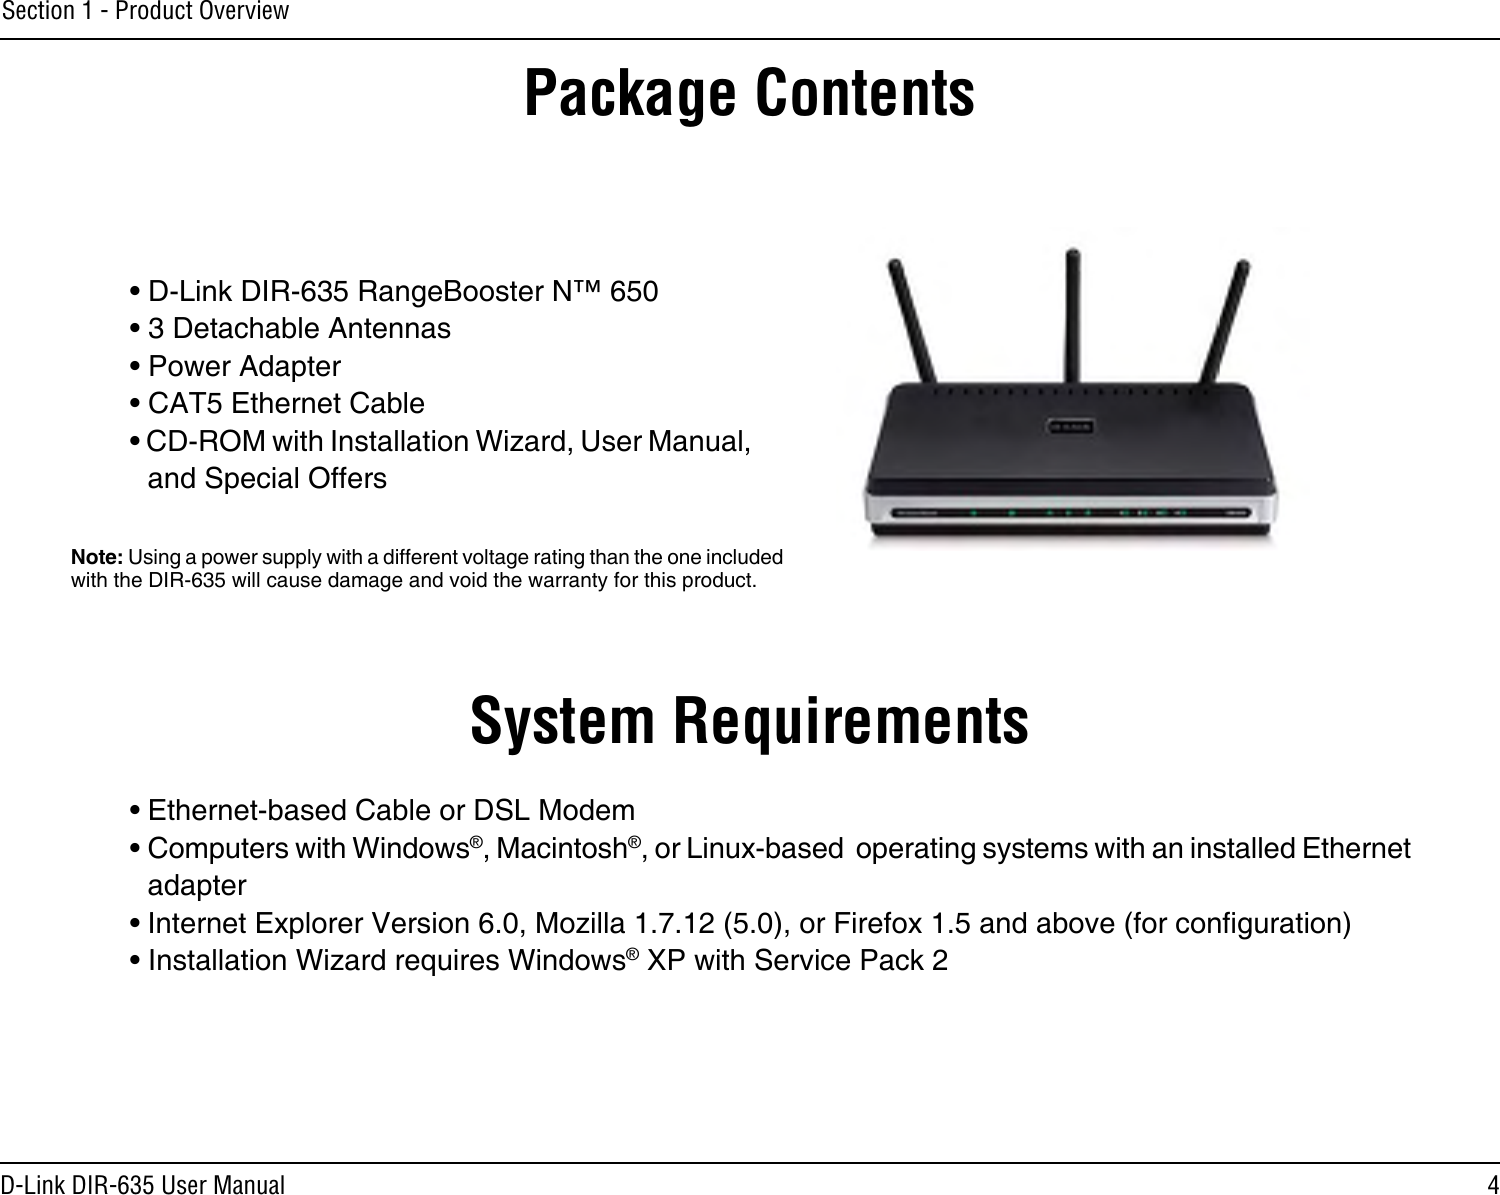 4D-Link DIR-635 User ManualSection 1 - Product Overview• D-Link DIR-635 RangeBooster N™ 650• 3 Detachable Antennas• Power Adapter• CAT5 Ethernet Cable• CD-ROM with Installation Wizard, User Manual, and Special OffersSystem Requirements• Ethernet-based Cable or DSL Modem• Computers with Windows®, Macintosh®, or Linux-based  operating systems with an installed Ethernet adapter• Internet Explorer Version 6.0, Mozilla 1.7.12 (5.0), or Firefox 1.5 and above (for conguration)• Installation Wizard requires Windows® XP with Service Pack 2Package ContentsNote: Using a power supply with a different voltage rating than the one included with the DIR-635 will cause damage and void the warranty for this product.